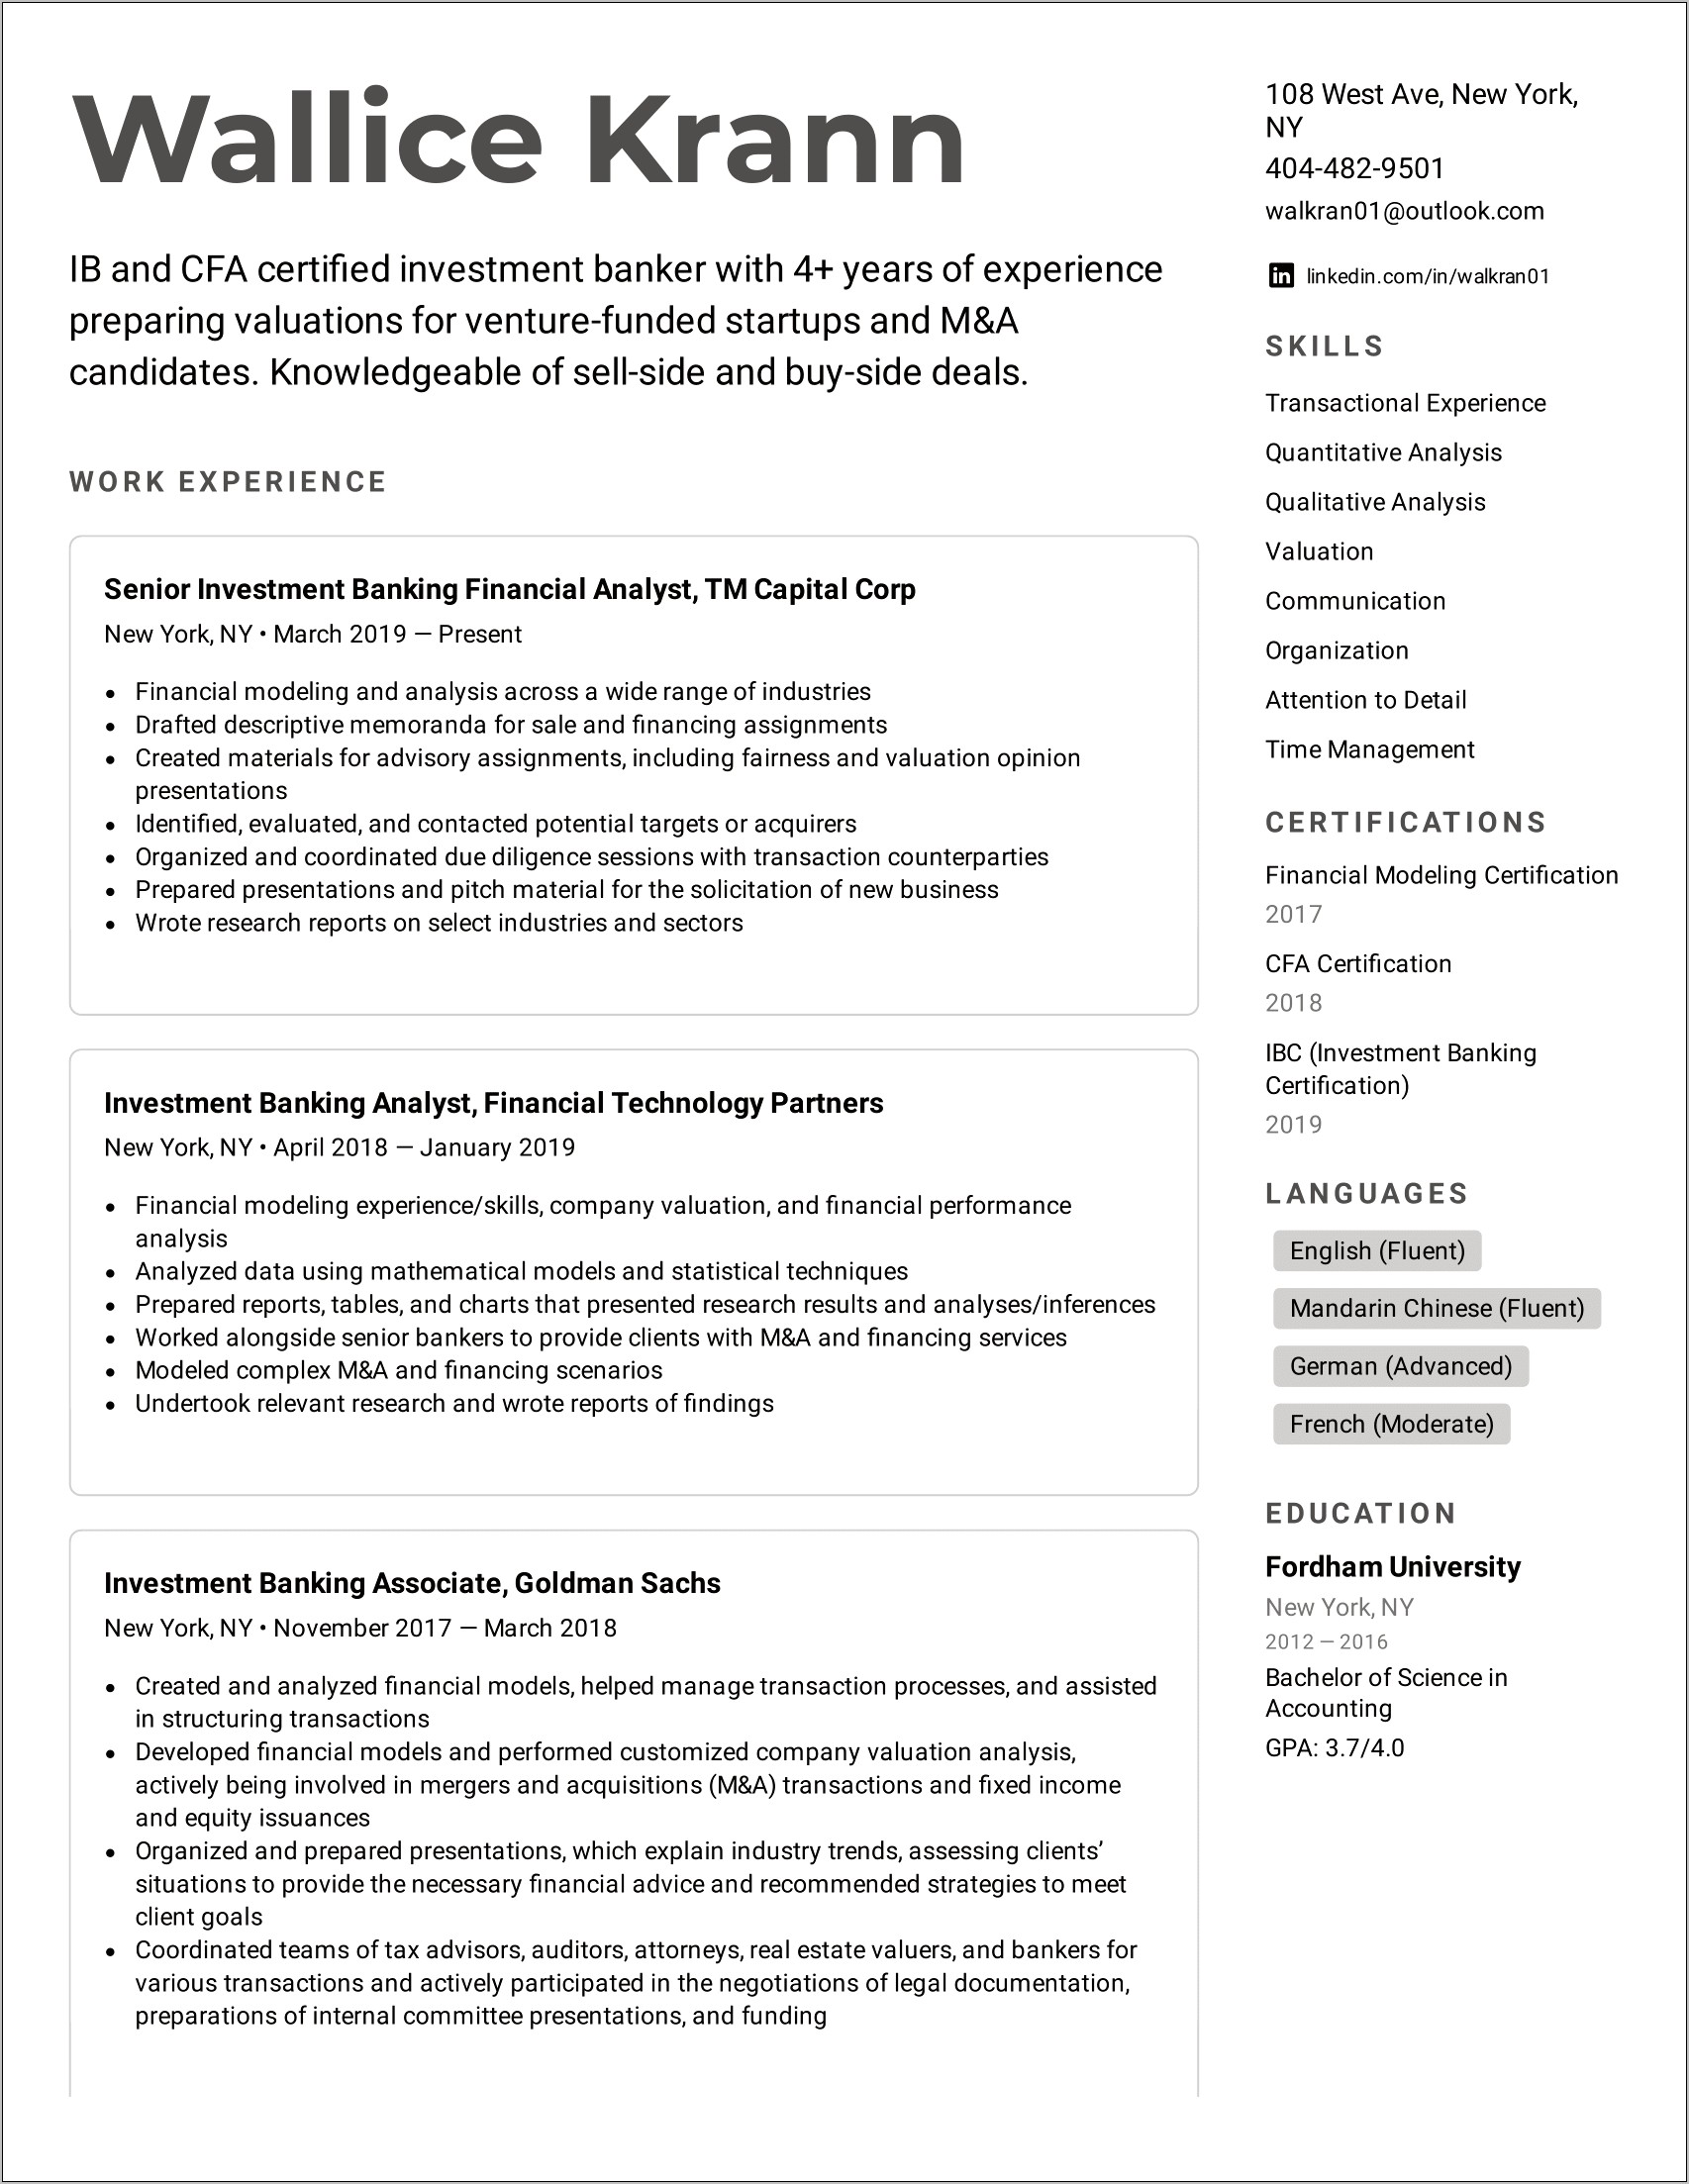 Real Estate Resume Examples 2018